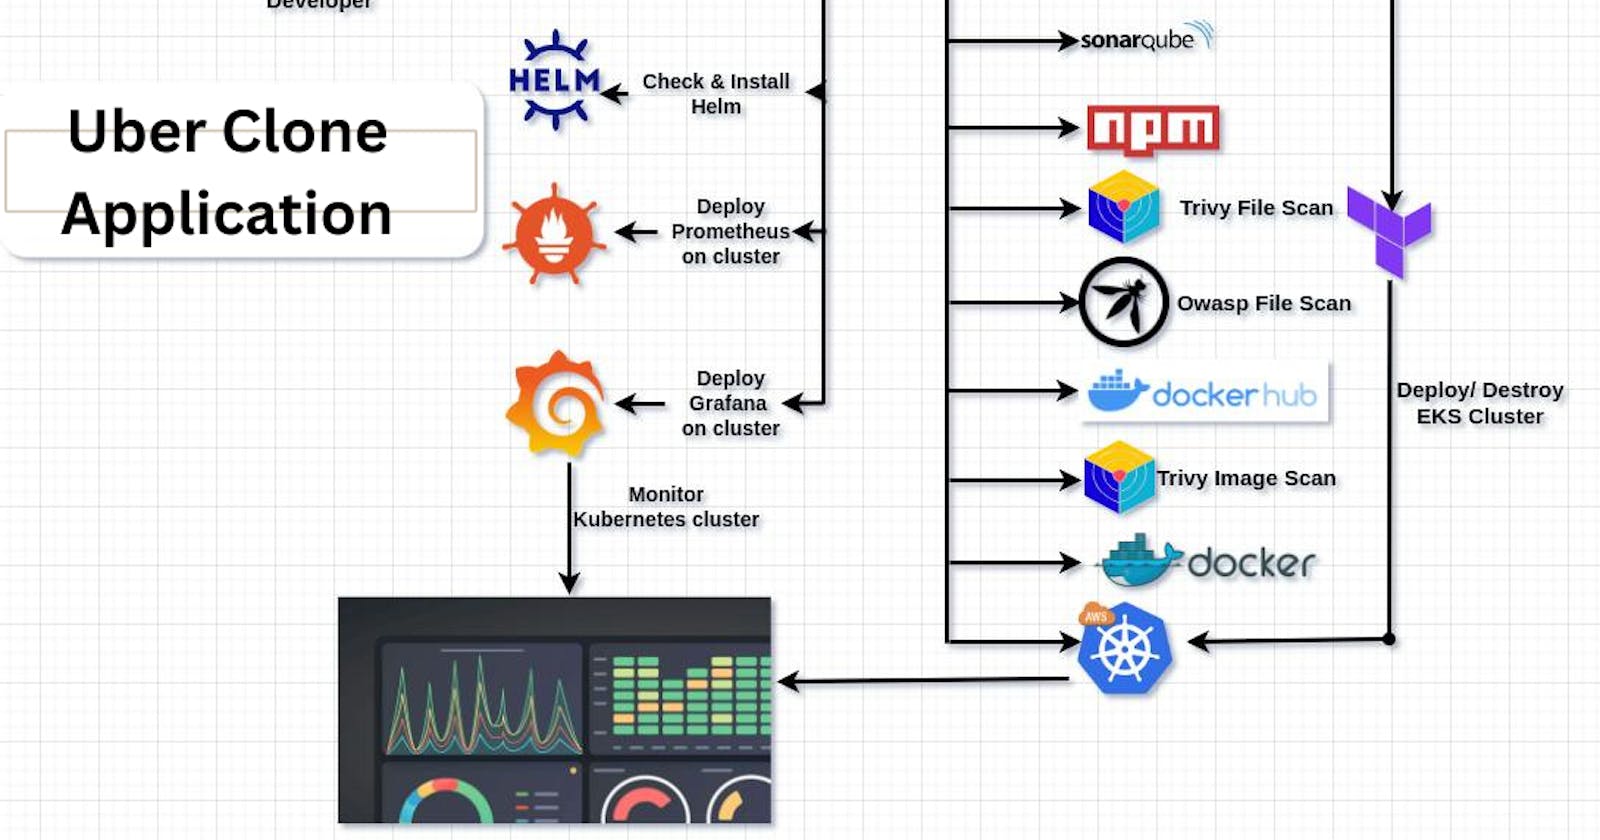 AutomateHub: CI/CD Blueprint for RideShare Replica with Proactive Monitoring Implementation (Step-By-Step Guide)